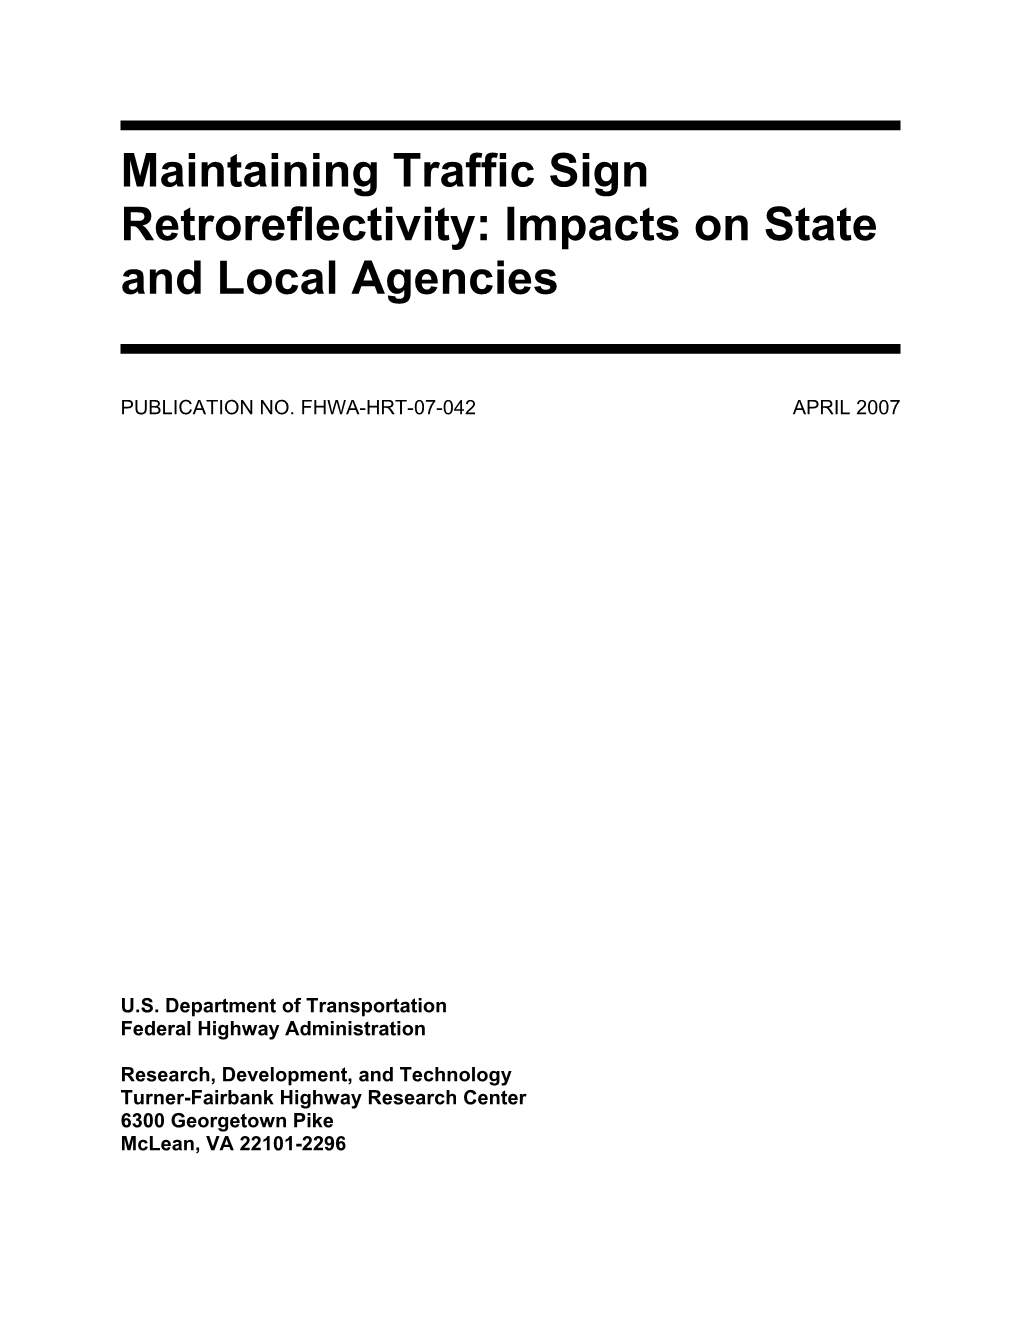 Maintaining Traffic Sign Retroreflectivity: Impacts on State and Local Agencies